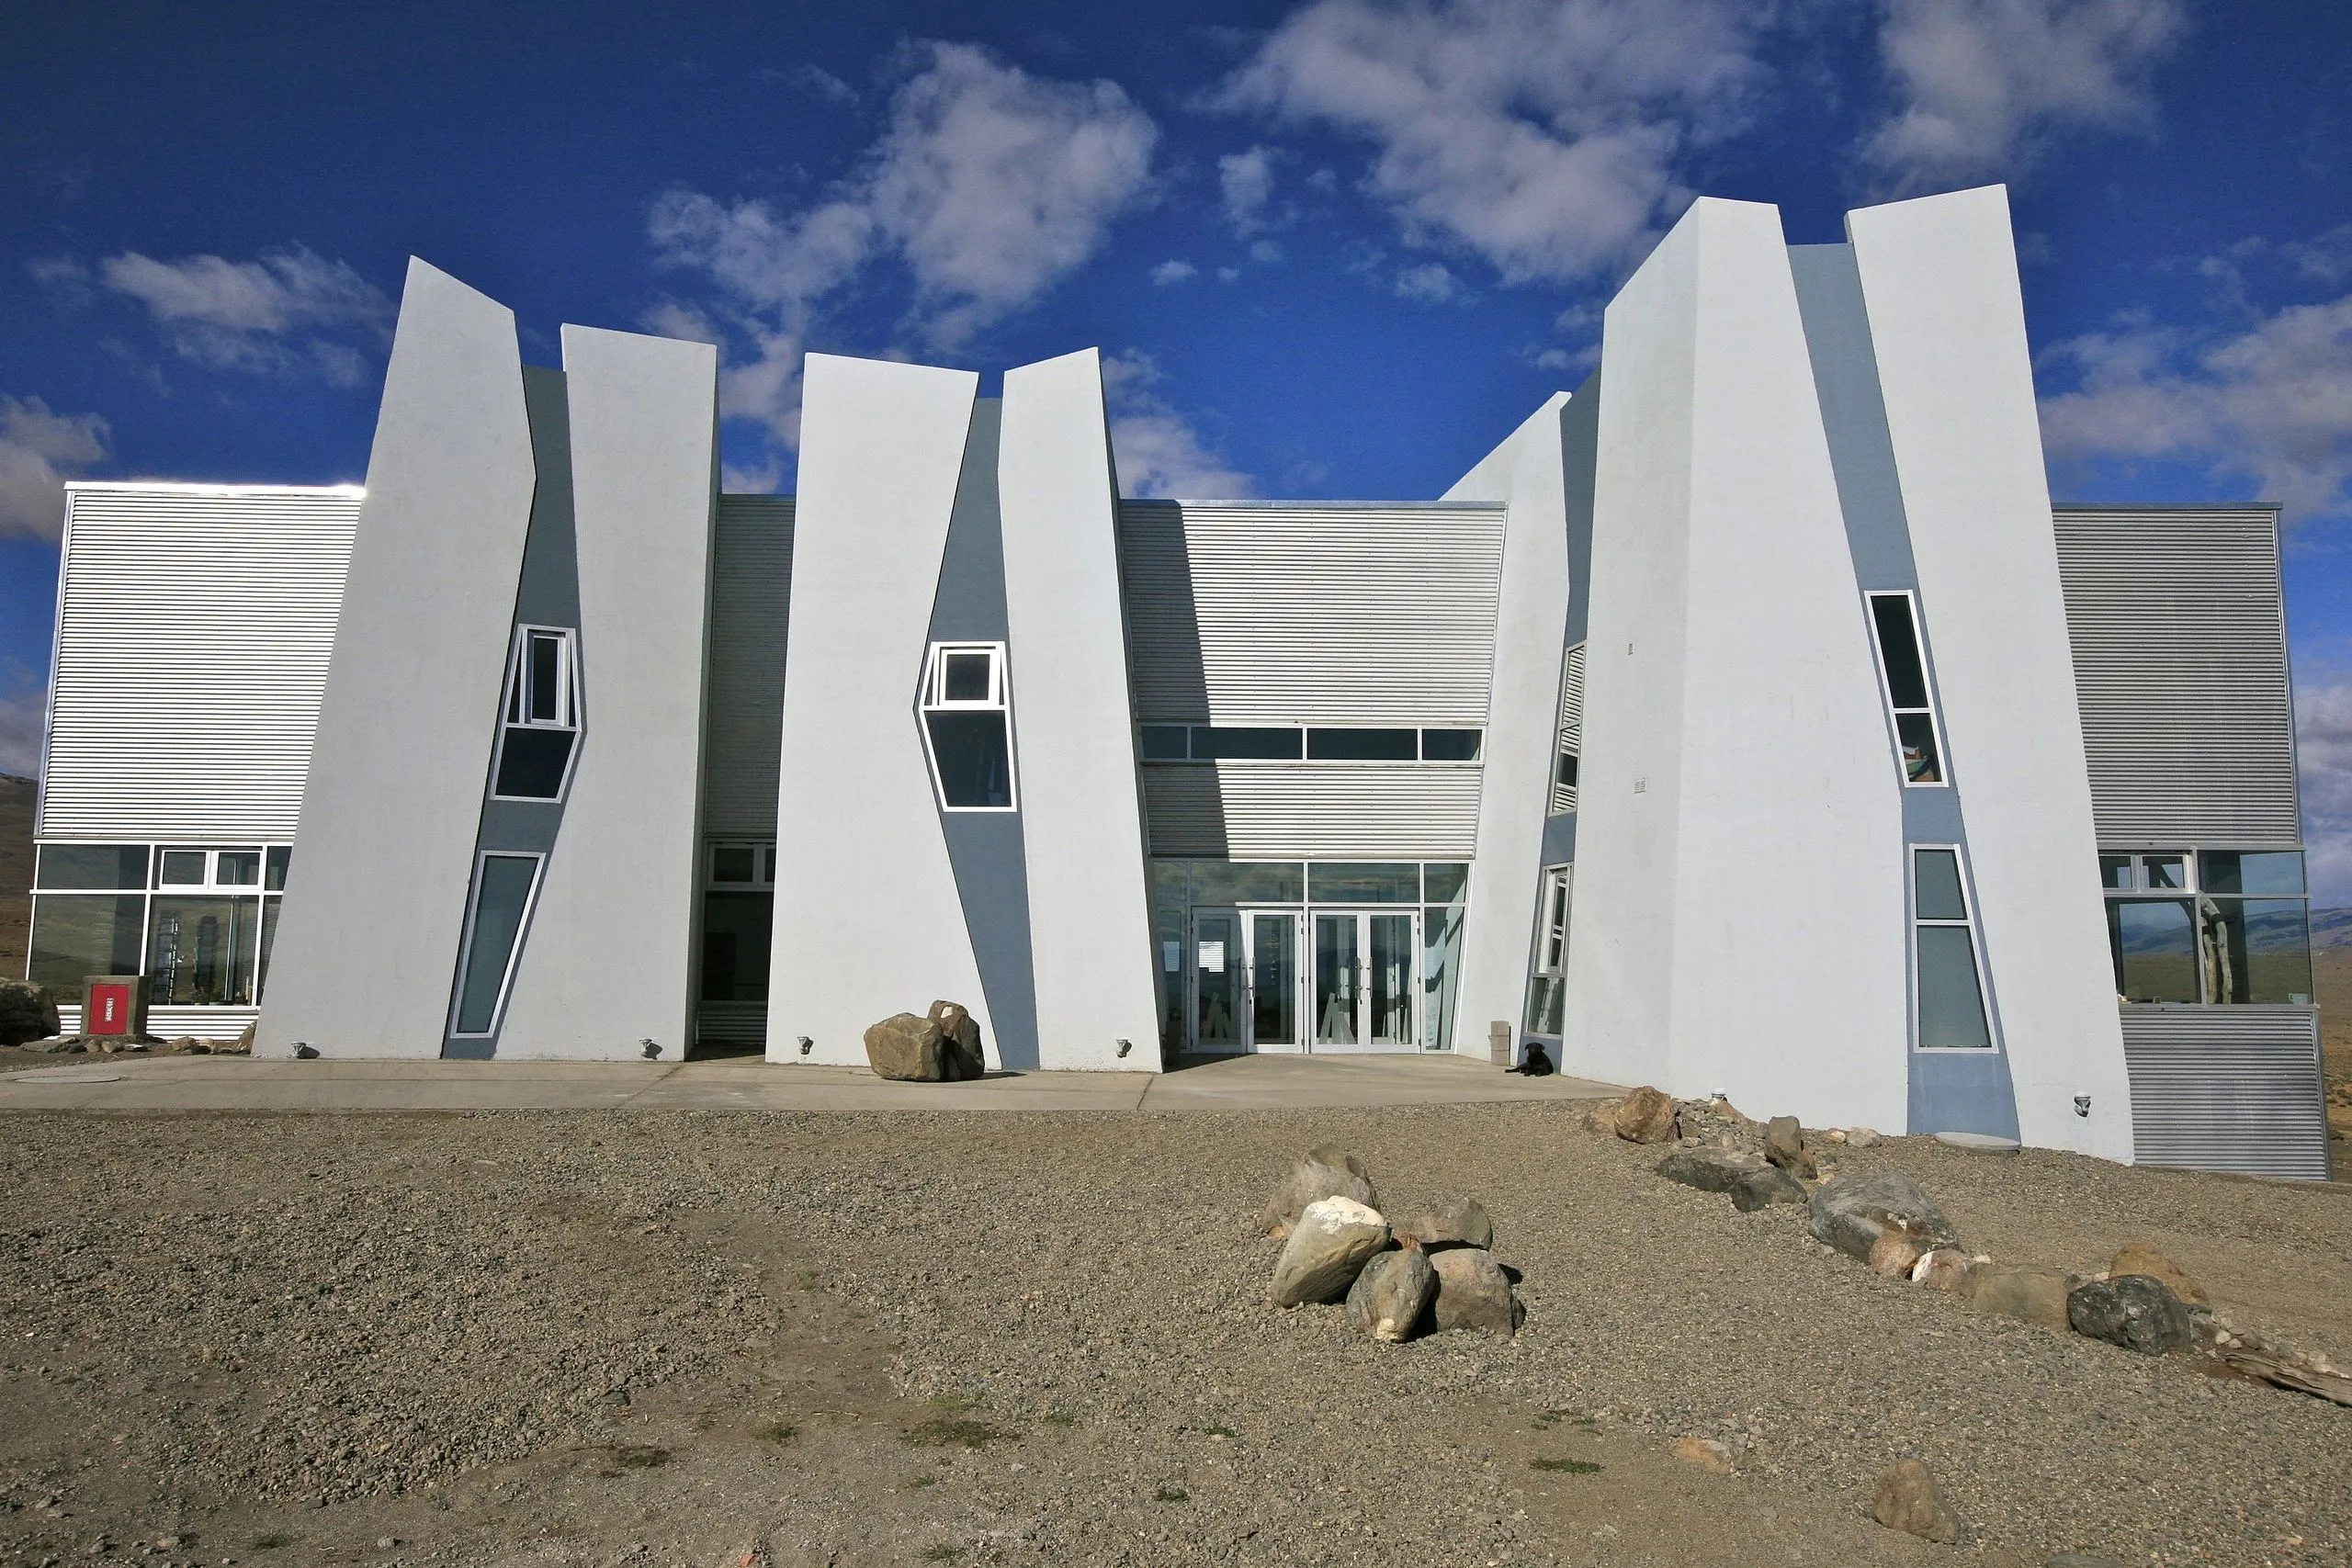 Glaciarium Patagonian Ice Museum in Argentina, South America | Museums - Rated 3.6